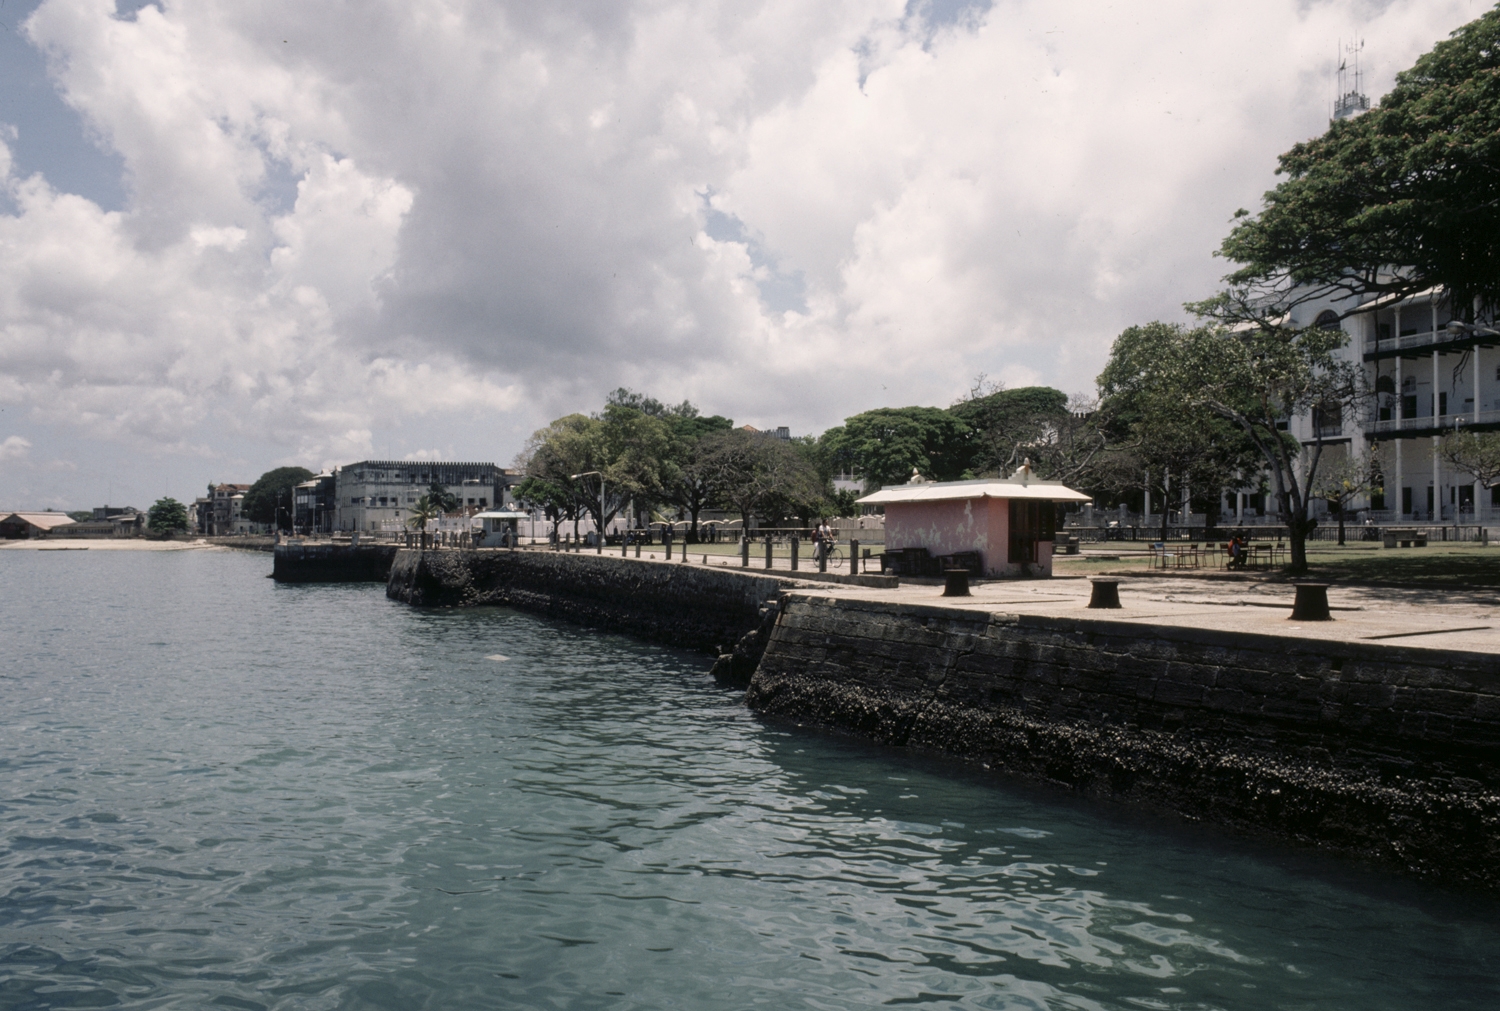 Waterfront promenade, looking east, with House of Wonders partially visible at right